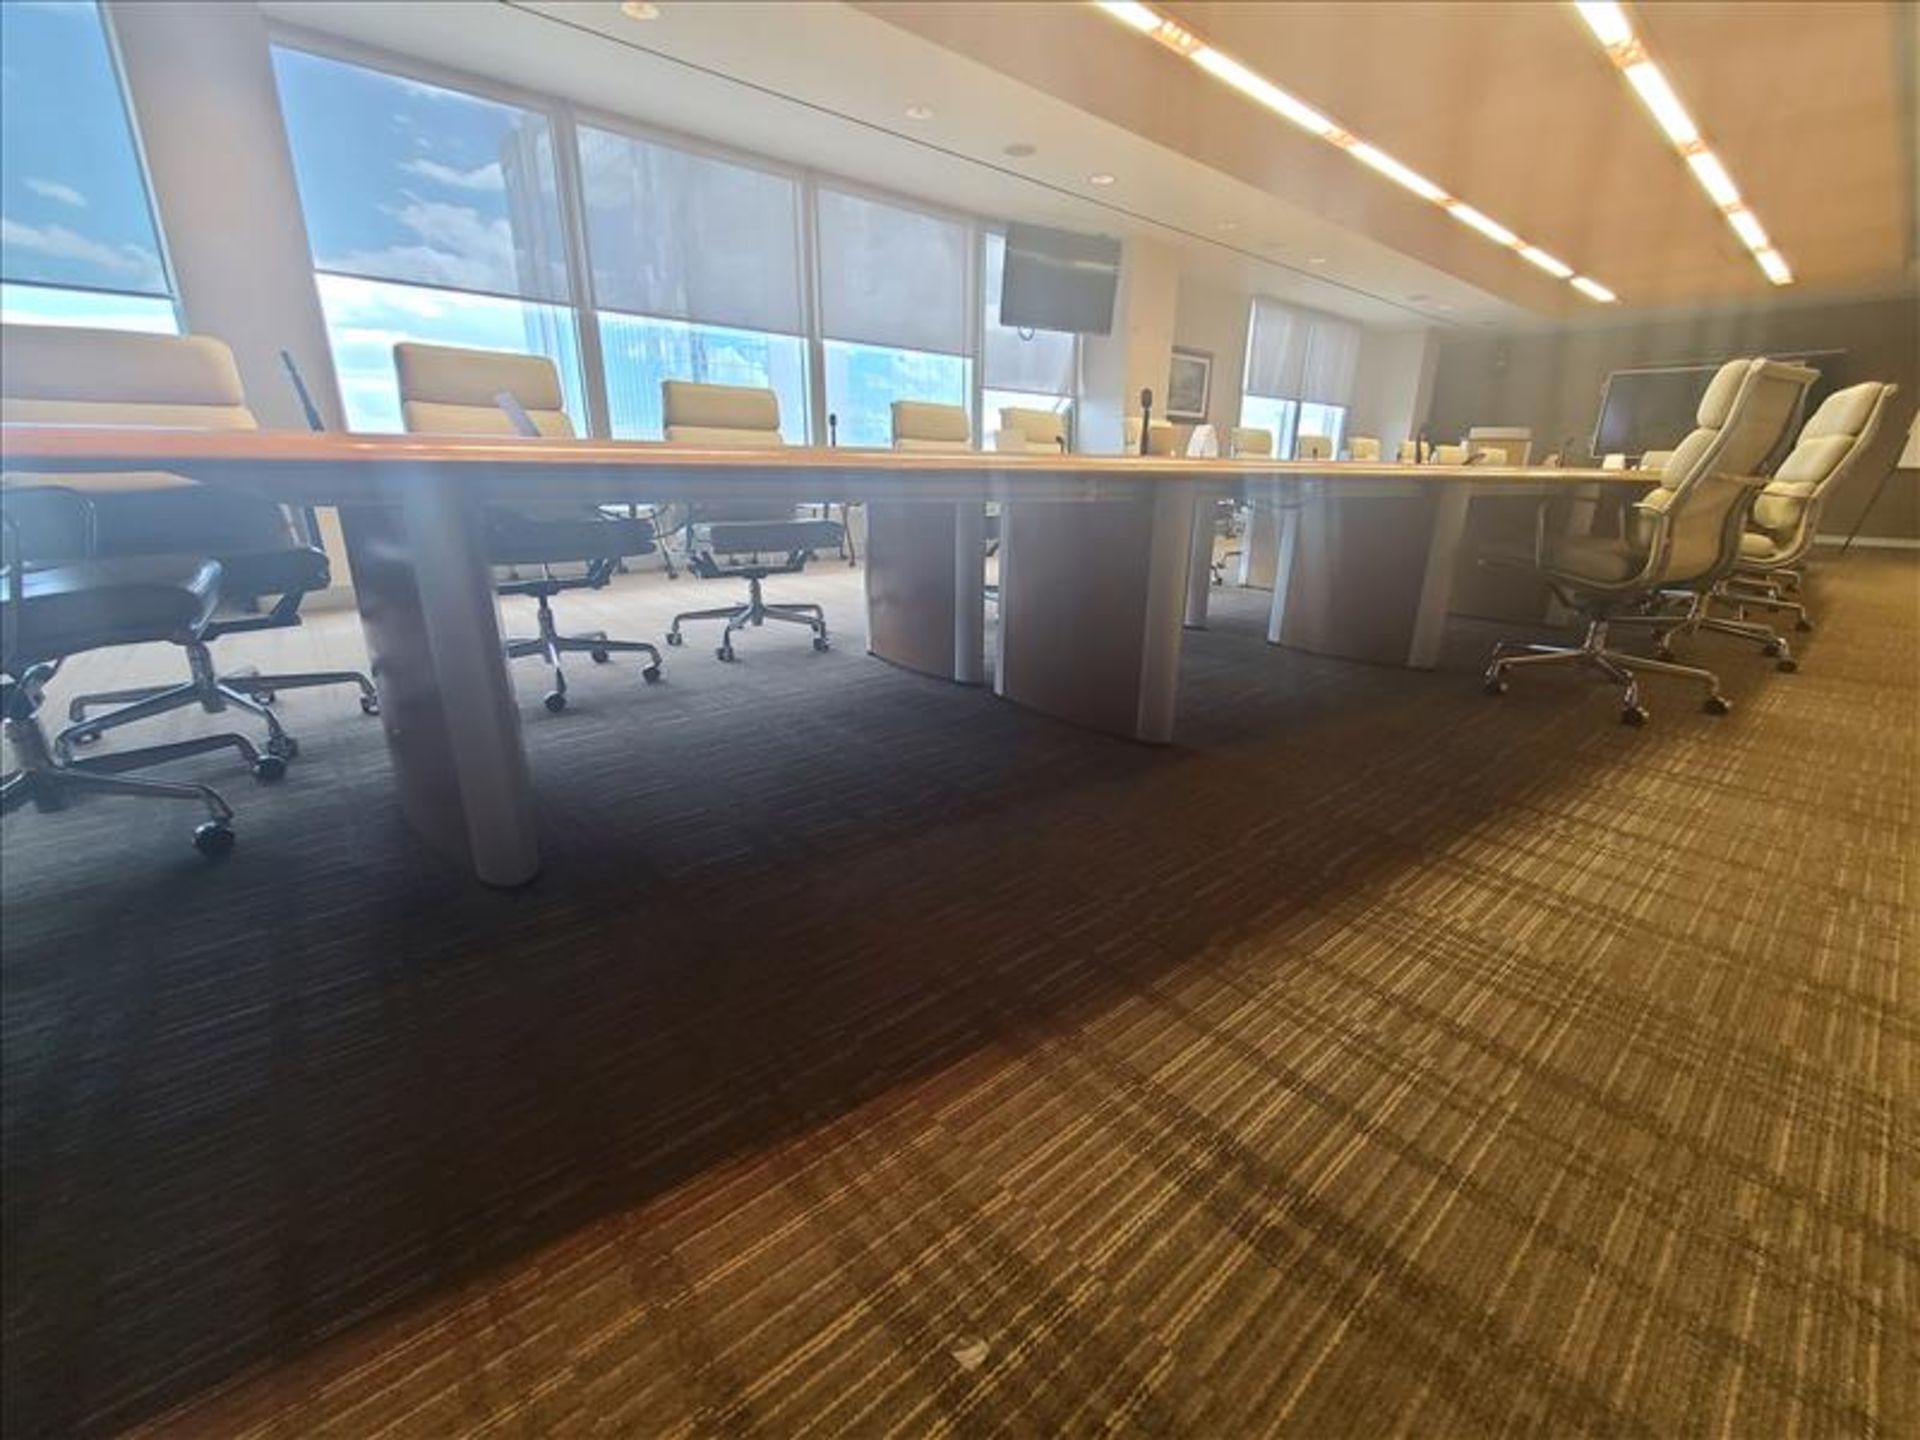 Boardroom Meeting Table approx. 40 ft. x 9 ft., (Qty 1) (Floor 3) (Boardroom 302) - Image 2 of 3